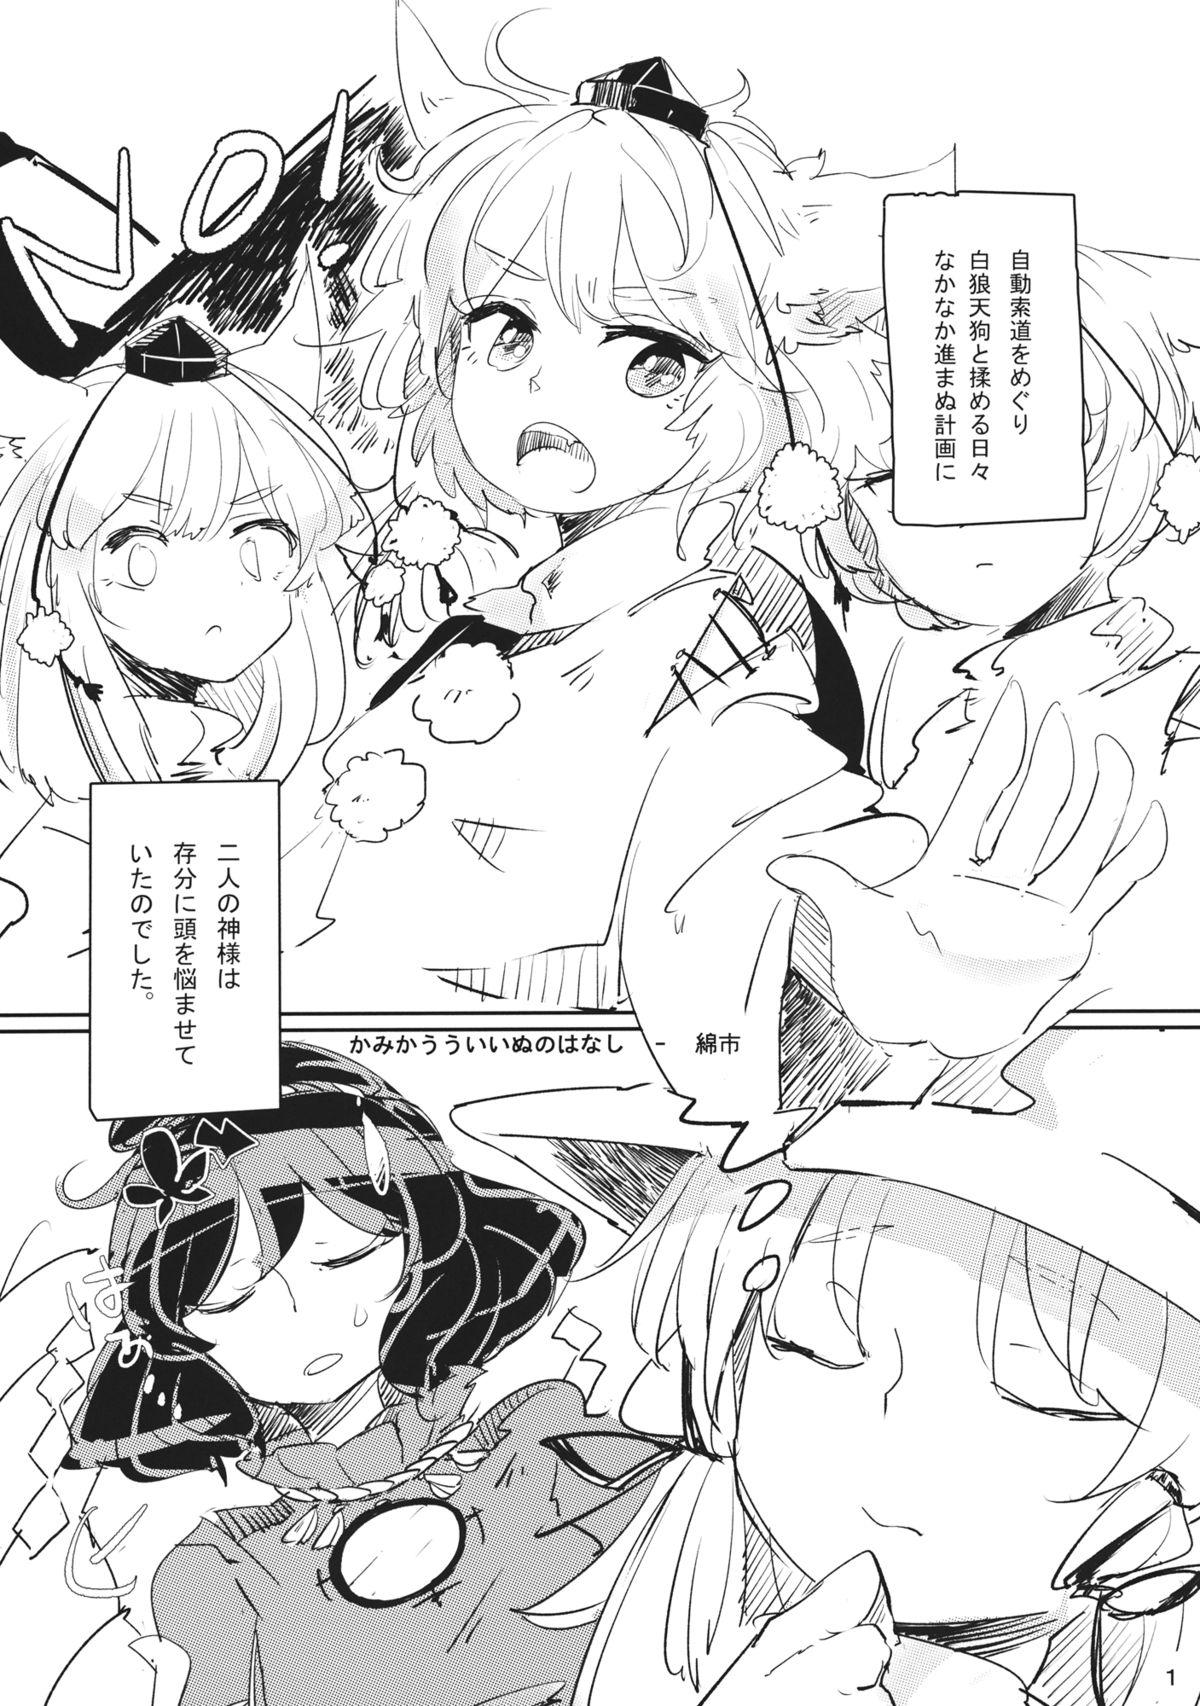 Hard Core Free Porn How to love of God - Touhou project Girlfriend - Page 2